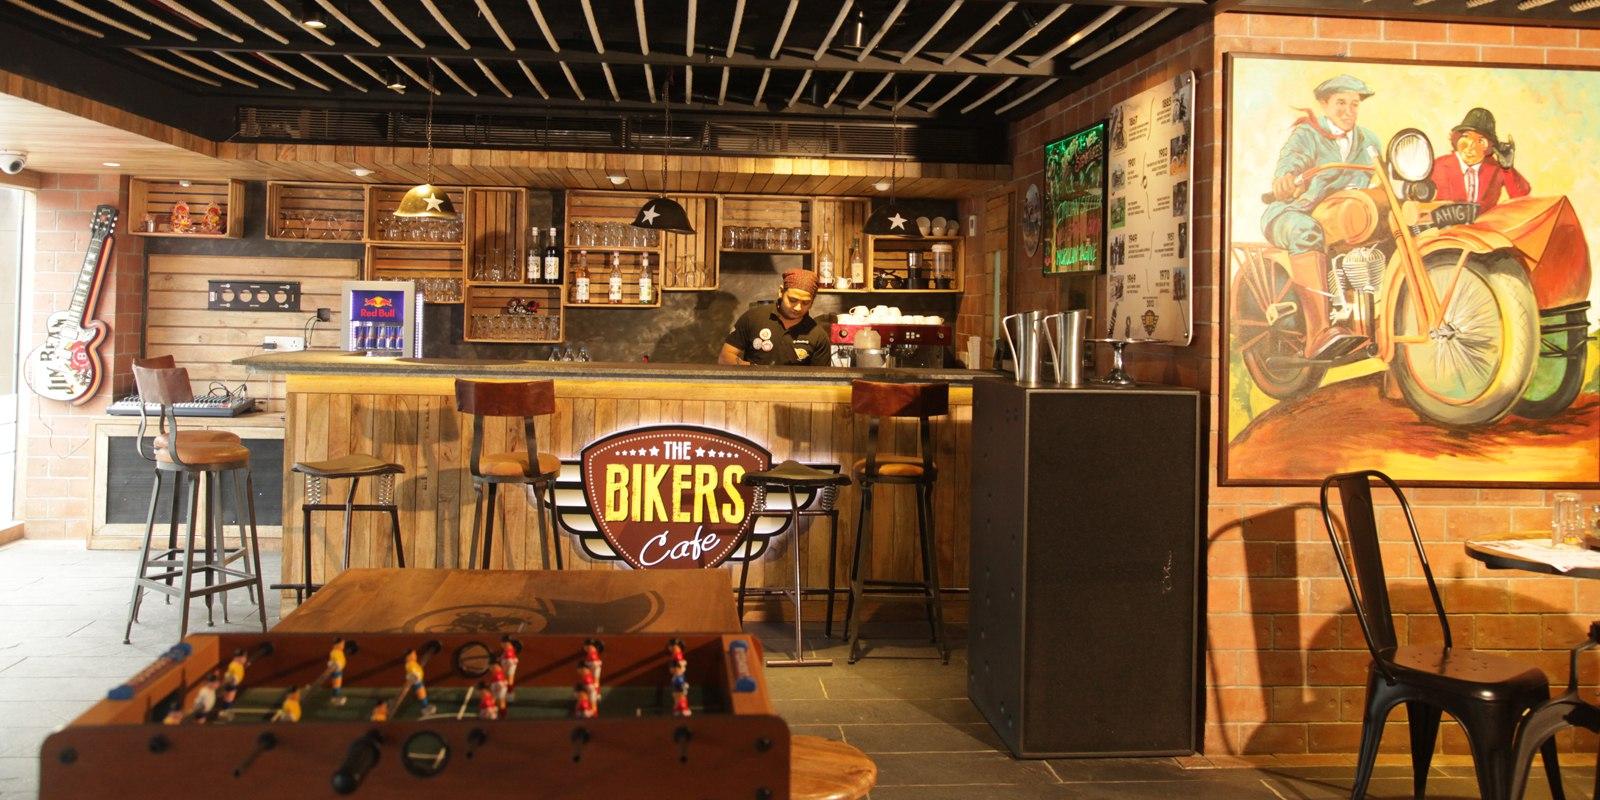 Cover image of this place The Bikers Cafe